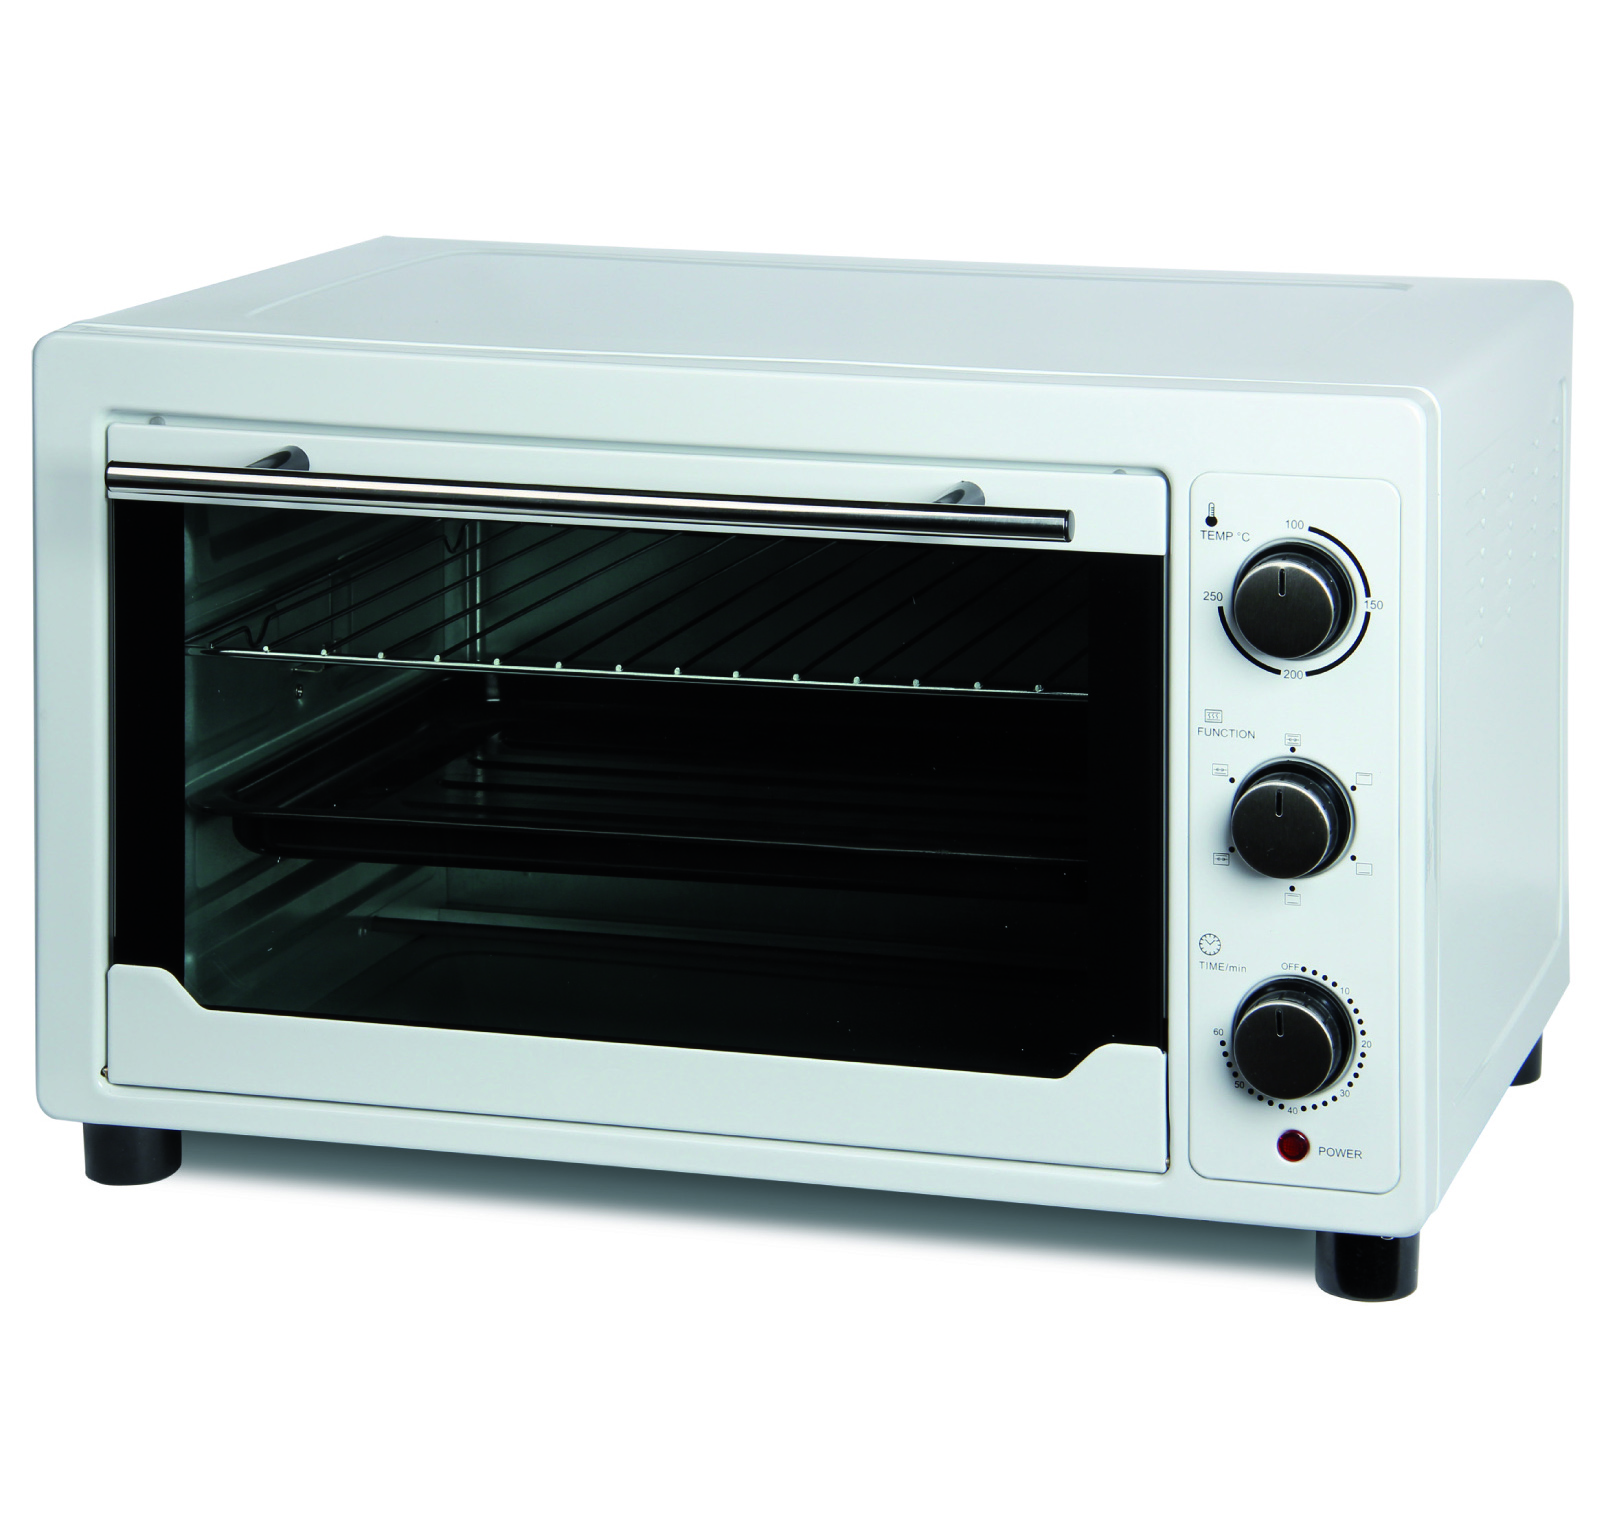 Electric oven ,Toaster oven with rotisserie, Pizza oven 45 liters Convection oven